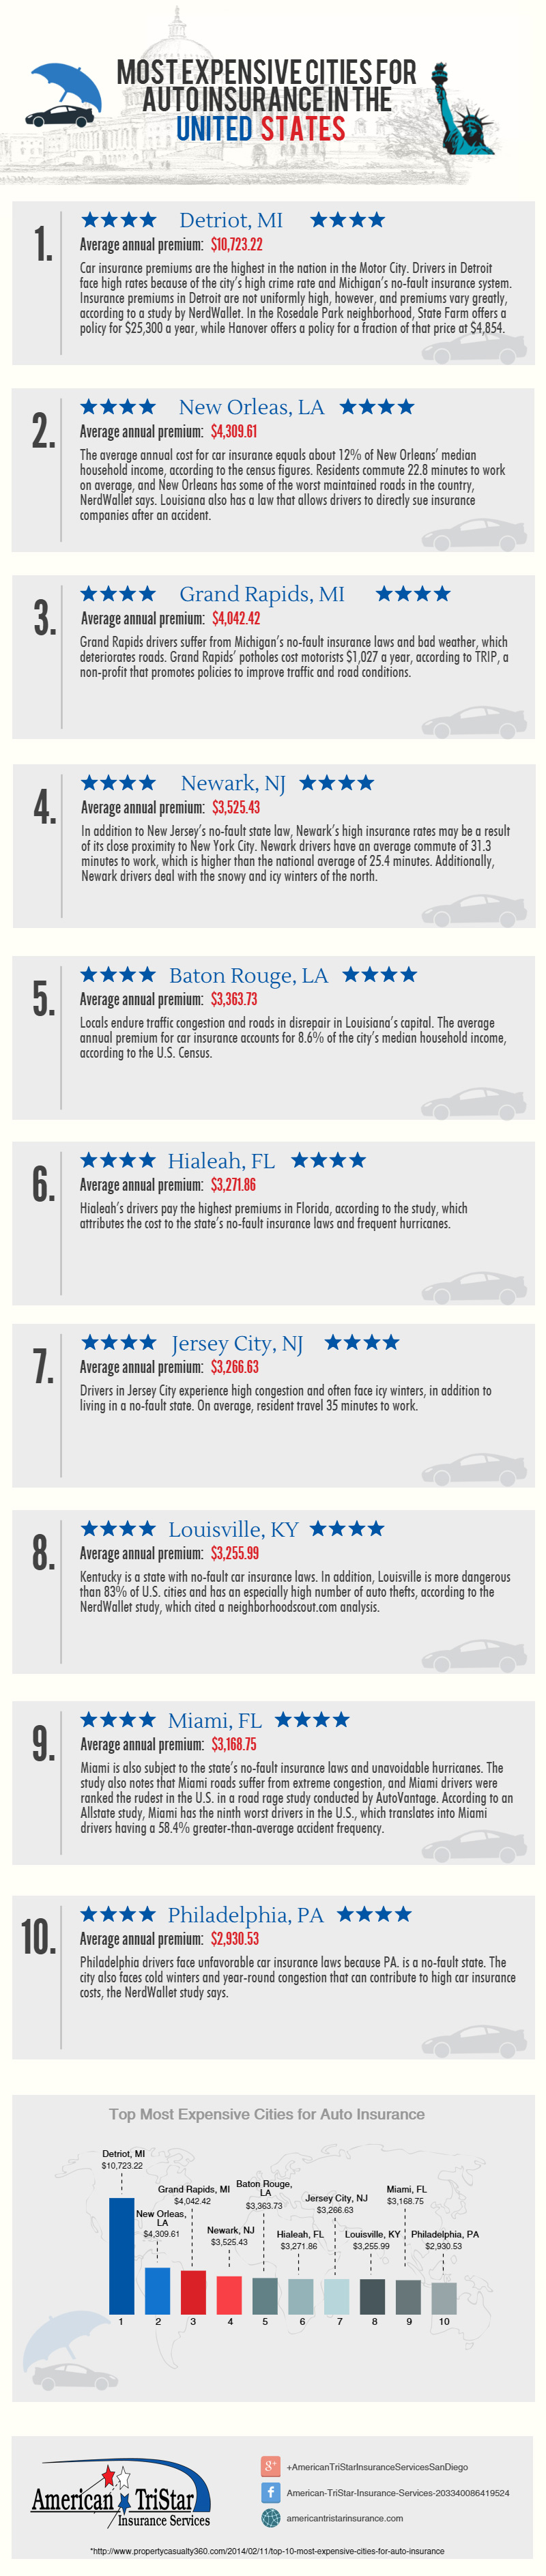 Top Most Expensive Cities for Auto Insurance in US